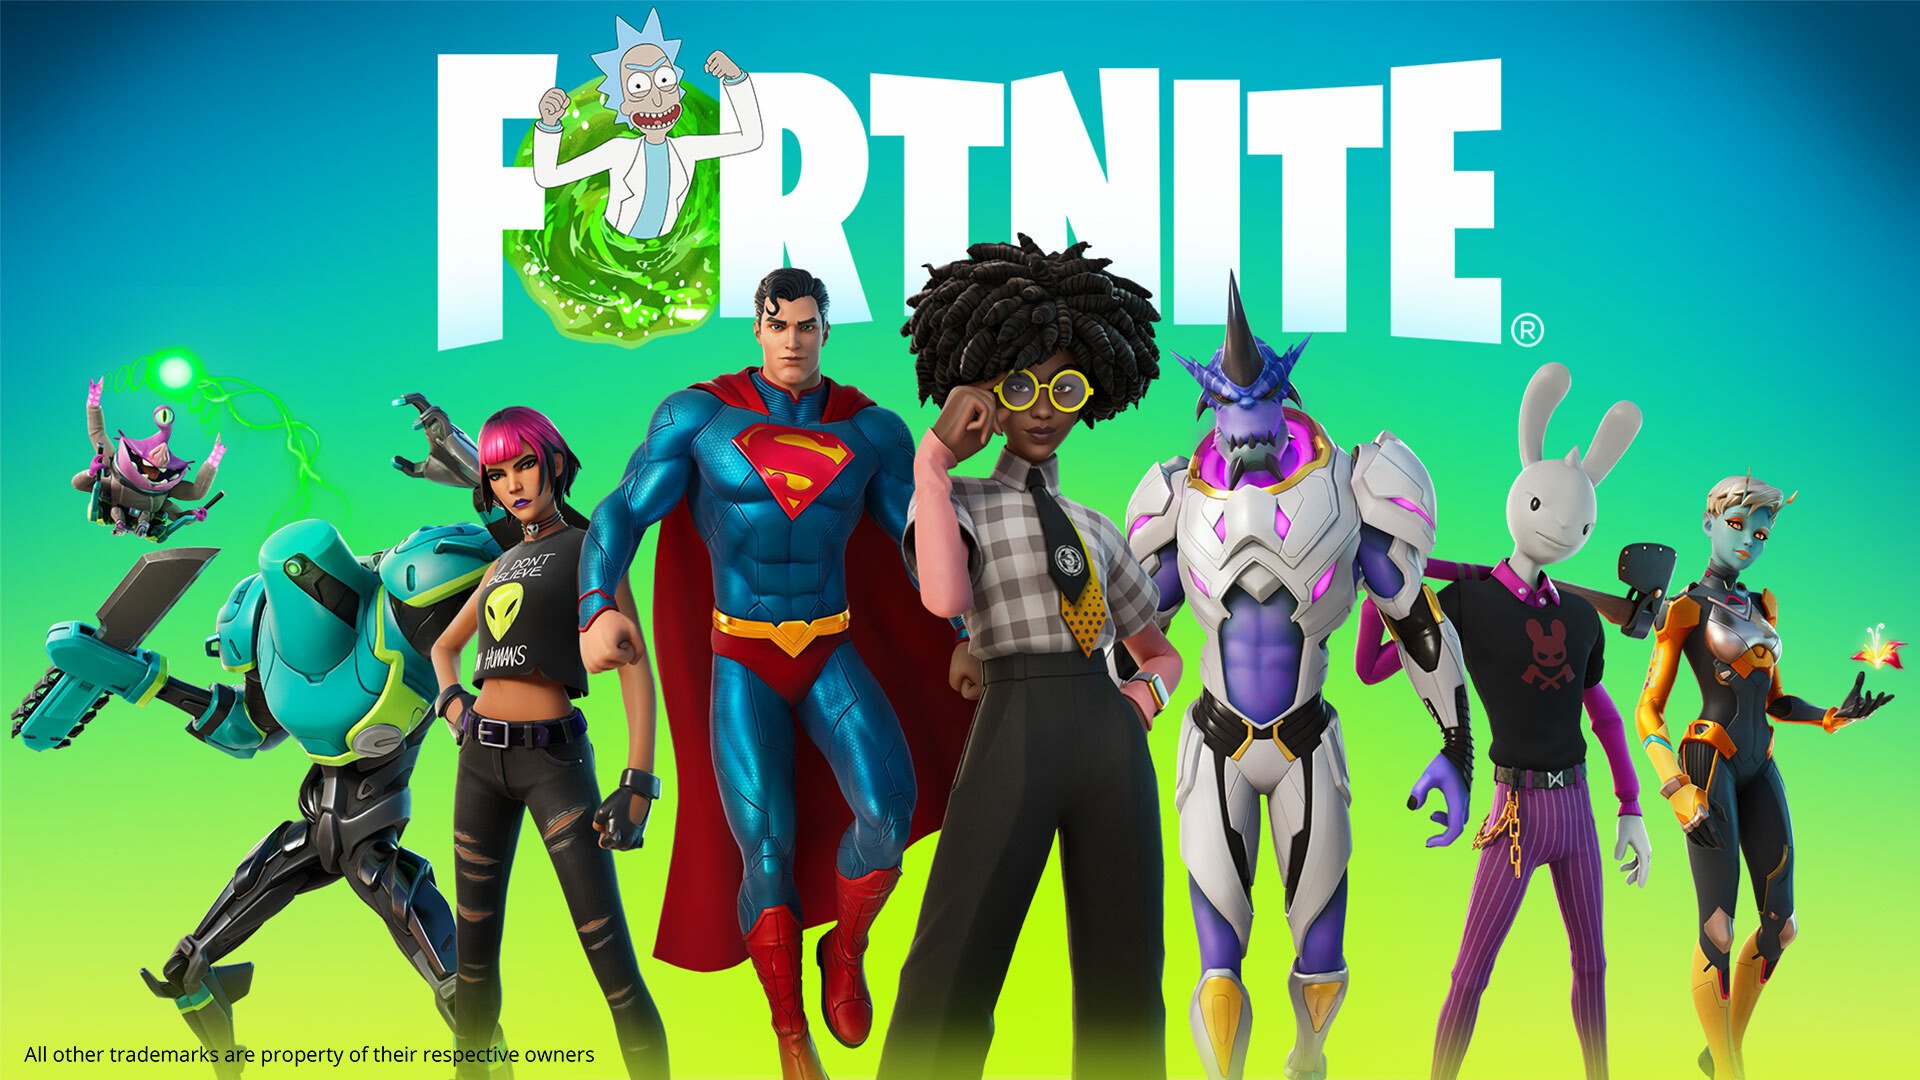 Fortnite Battle Pass For Chapter 2 Season 7 Features Superman, Rick & Morty&039s Rick